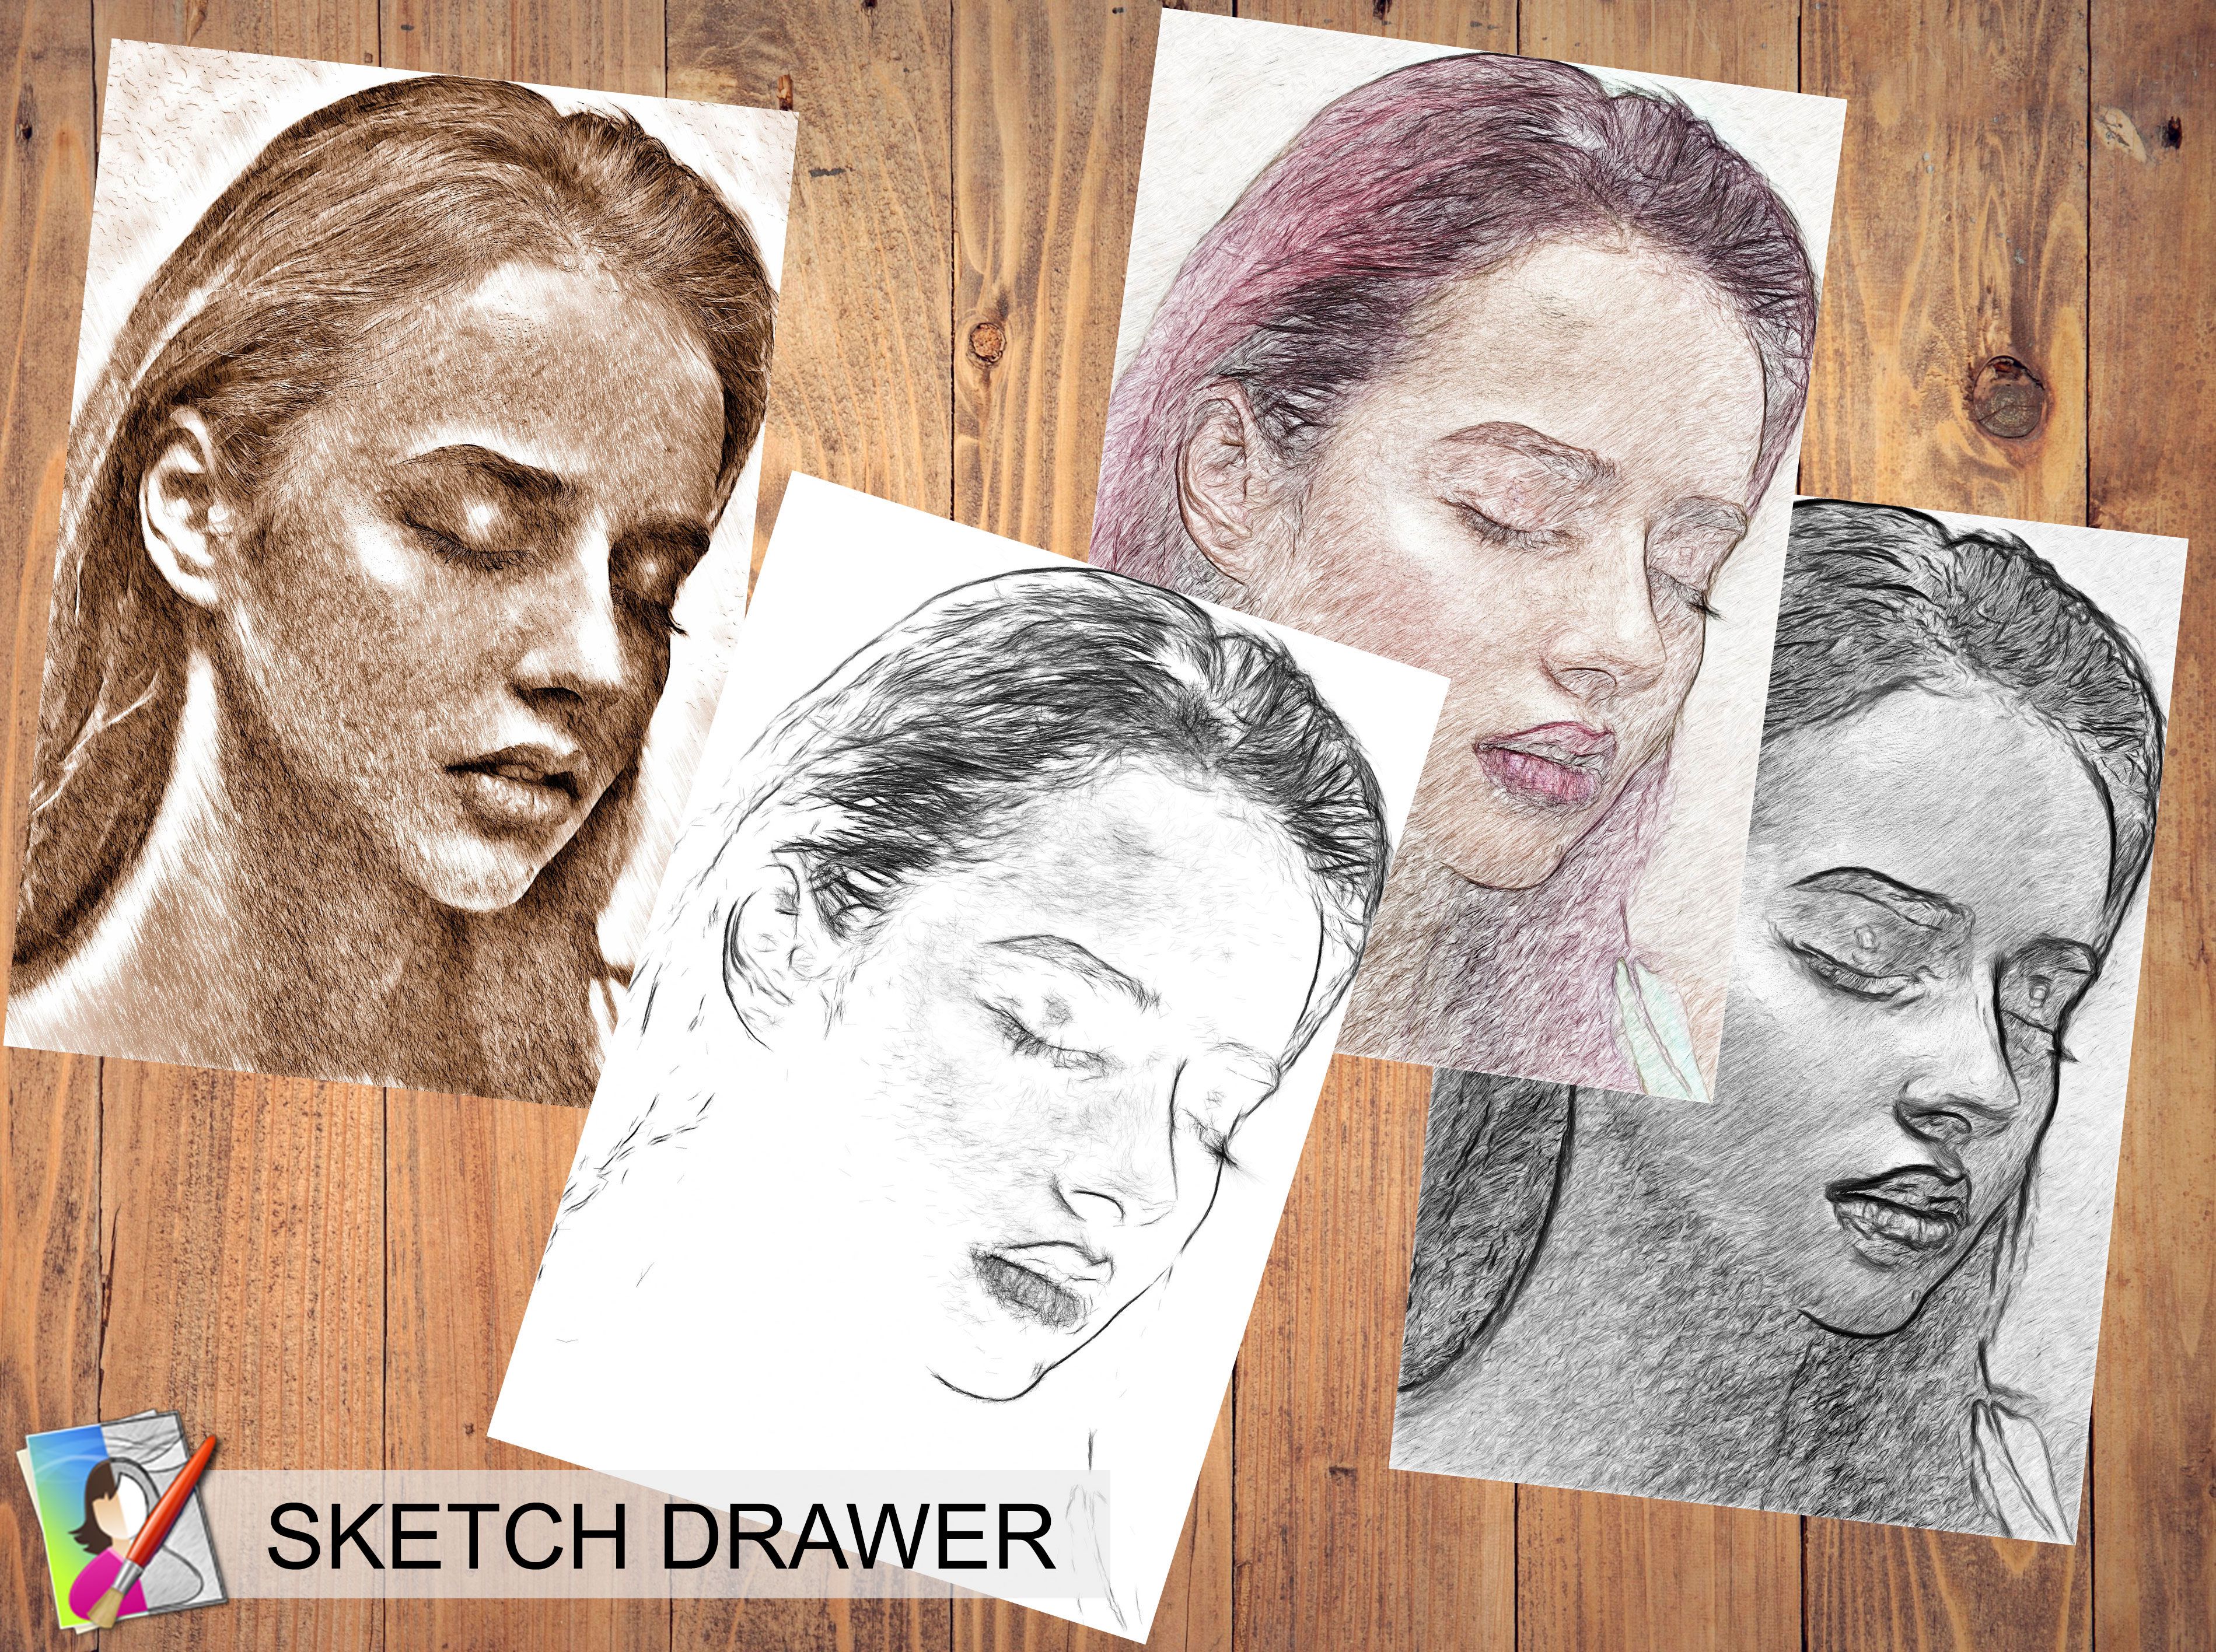 Convert Photos to Sketches with These 10 Amazing Tools - VanceAI